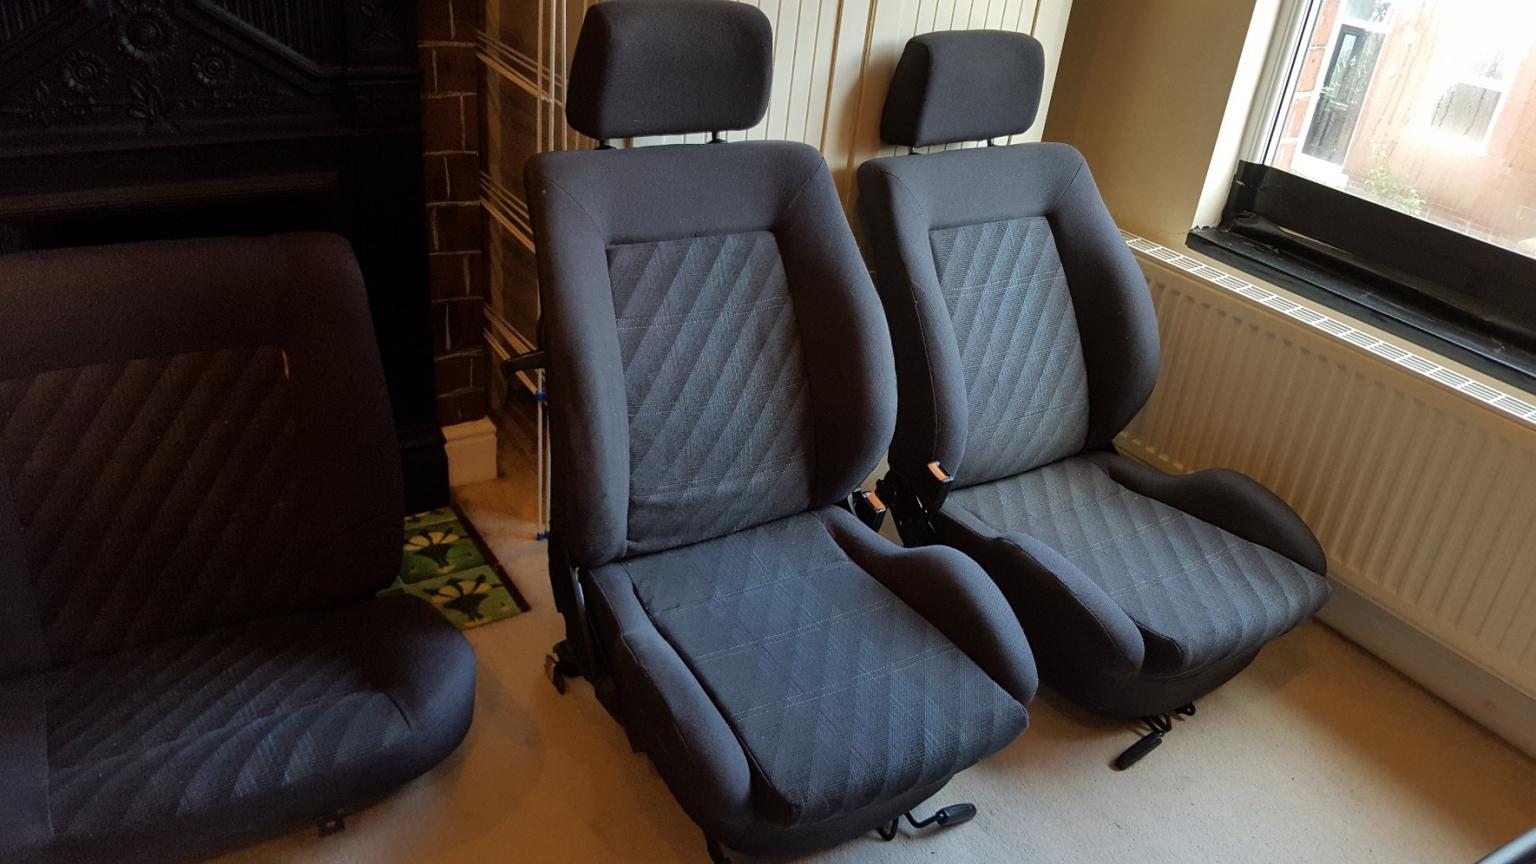 Mk2 Golf Gti Seats In S40 Chesterfield For 215 00 For Sale